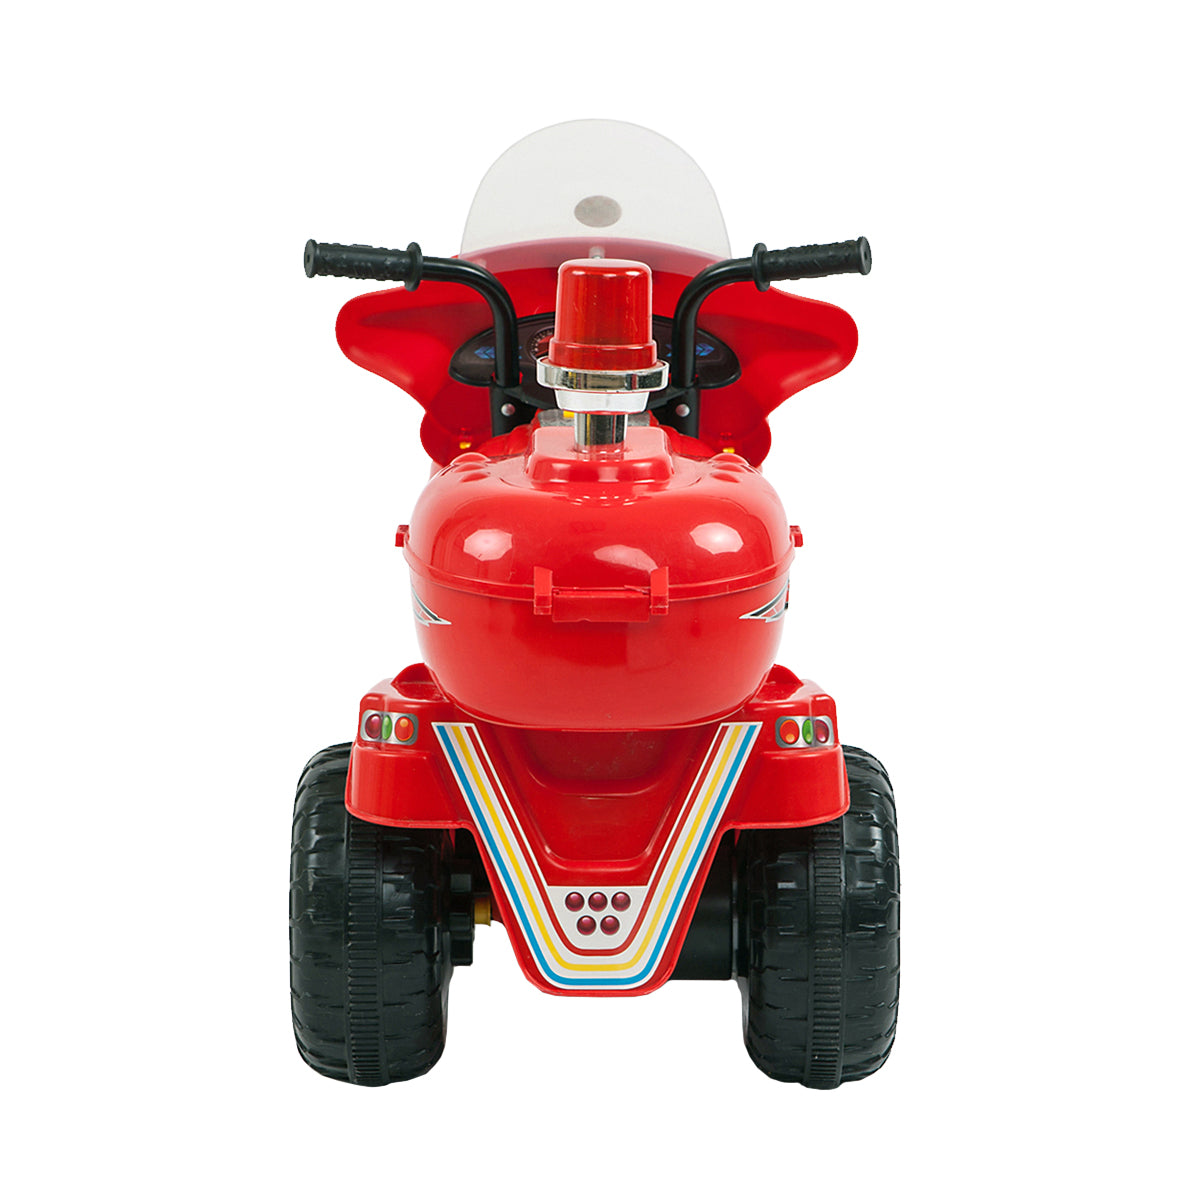 Rear view of the red Children's Electric Ride-on Motorcycle